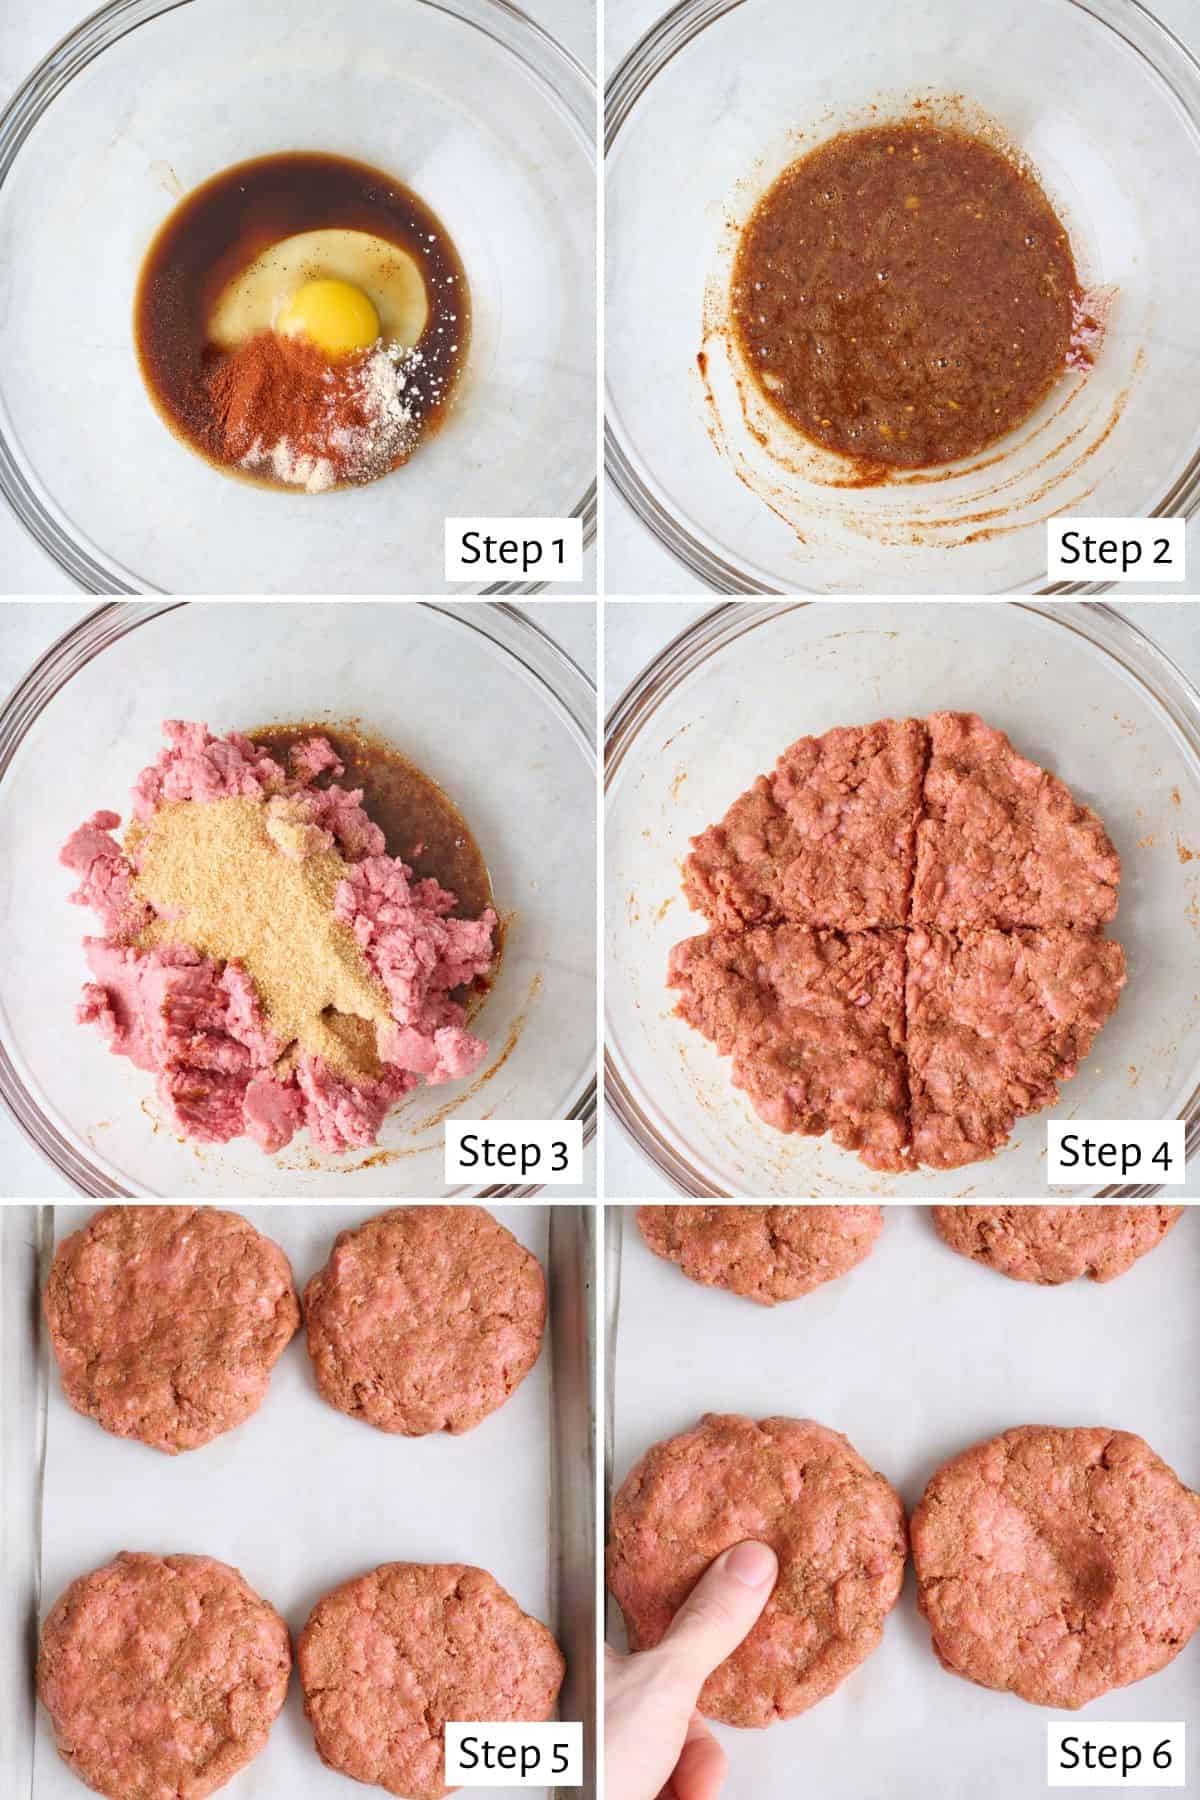 6 image collage making recipe: 1- sauce and seasonings in a bowl, 2- after mixing together, 3- ground beef and breadcrumbs added, 4- after combining and split into 4 sections, 5- patties formed o a baking sheet, 6- pressing an indention with thumb into center of patties.